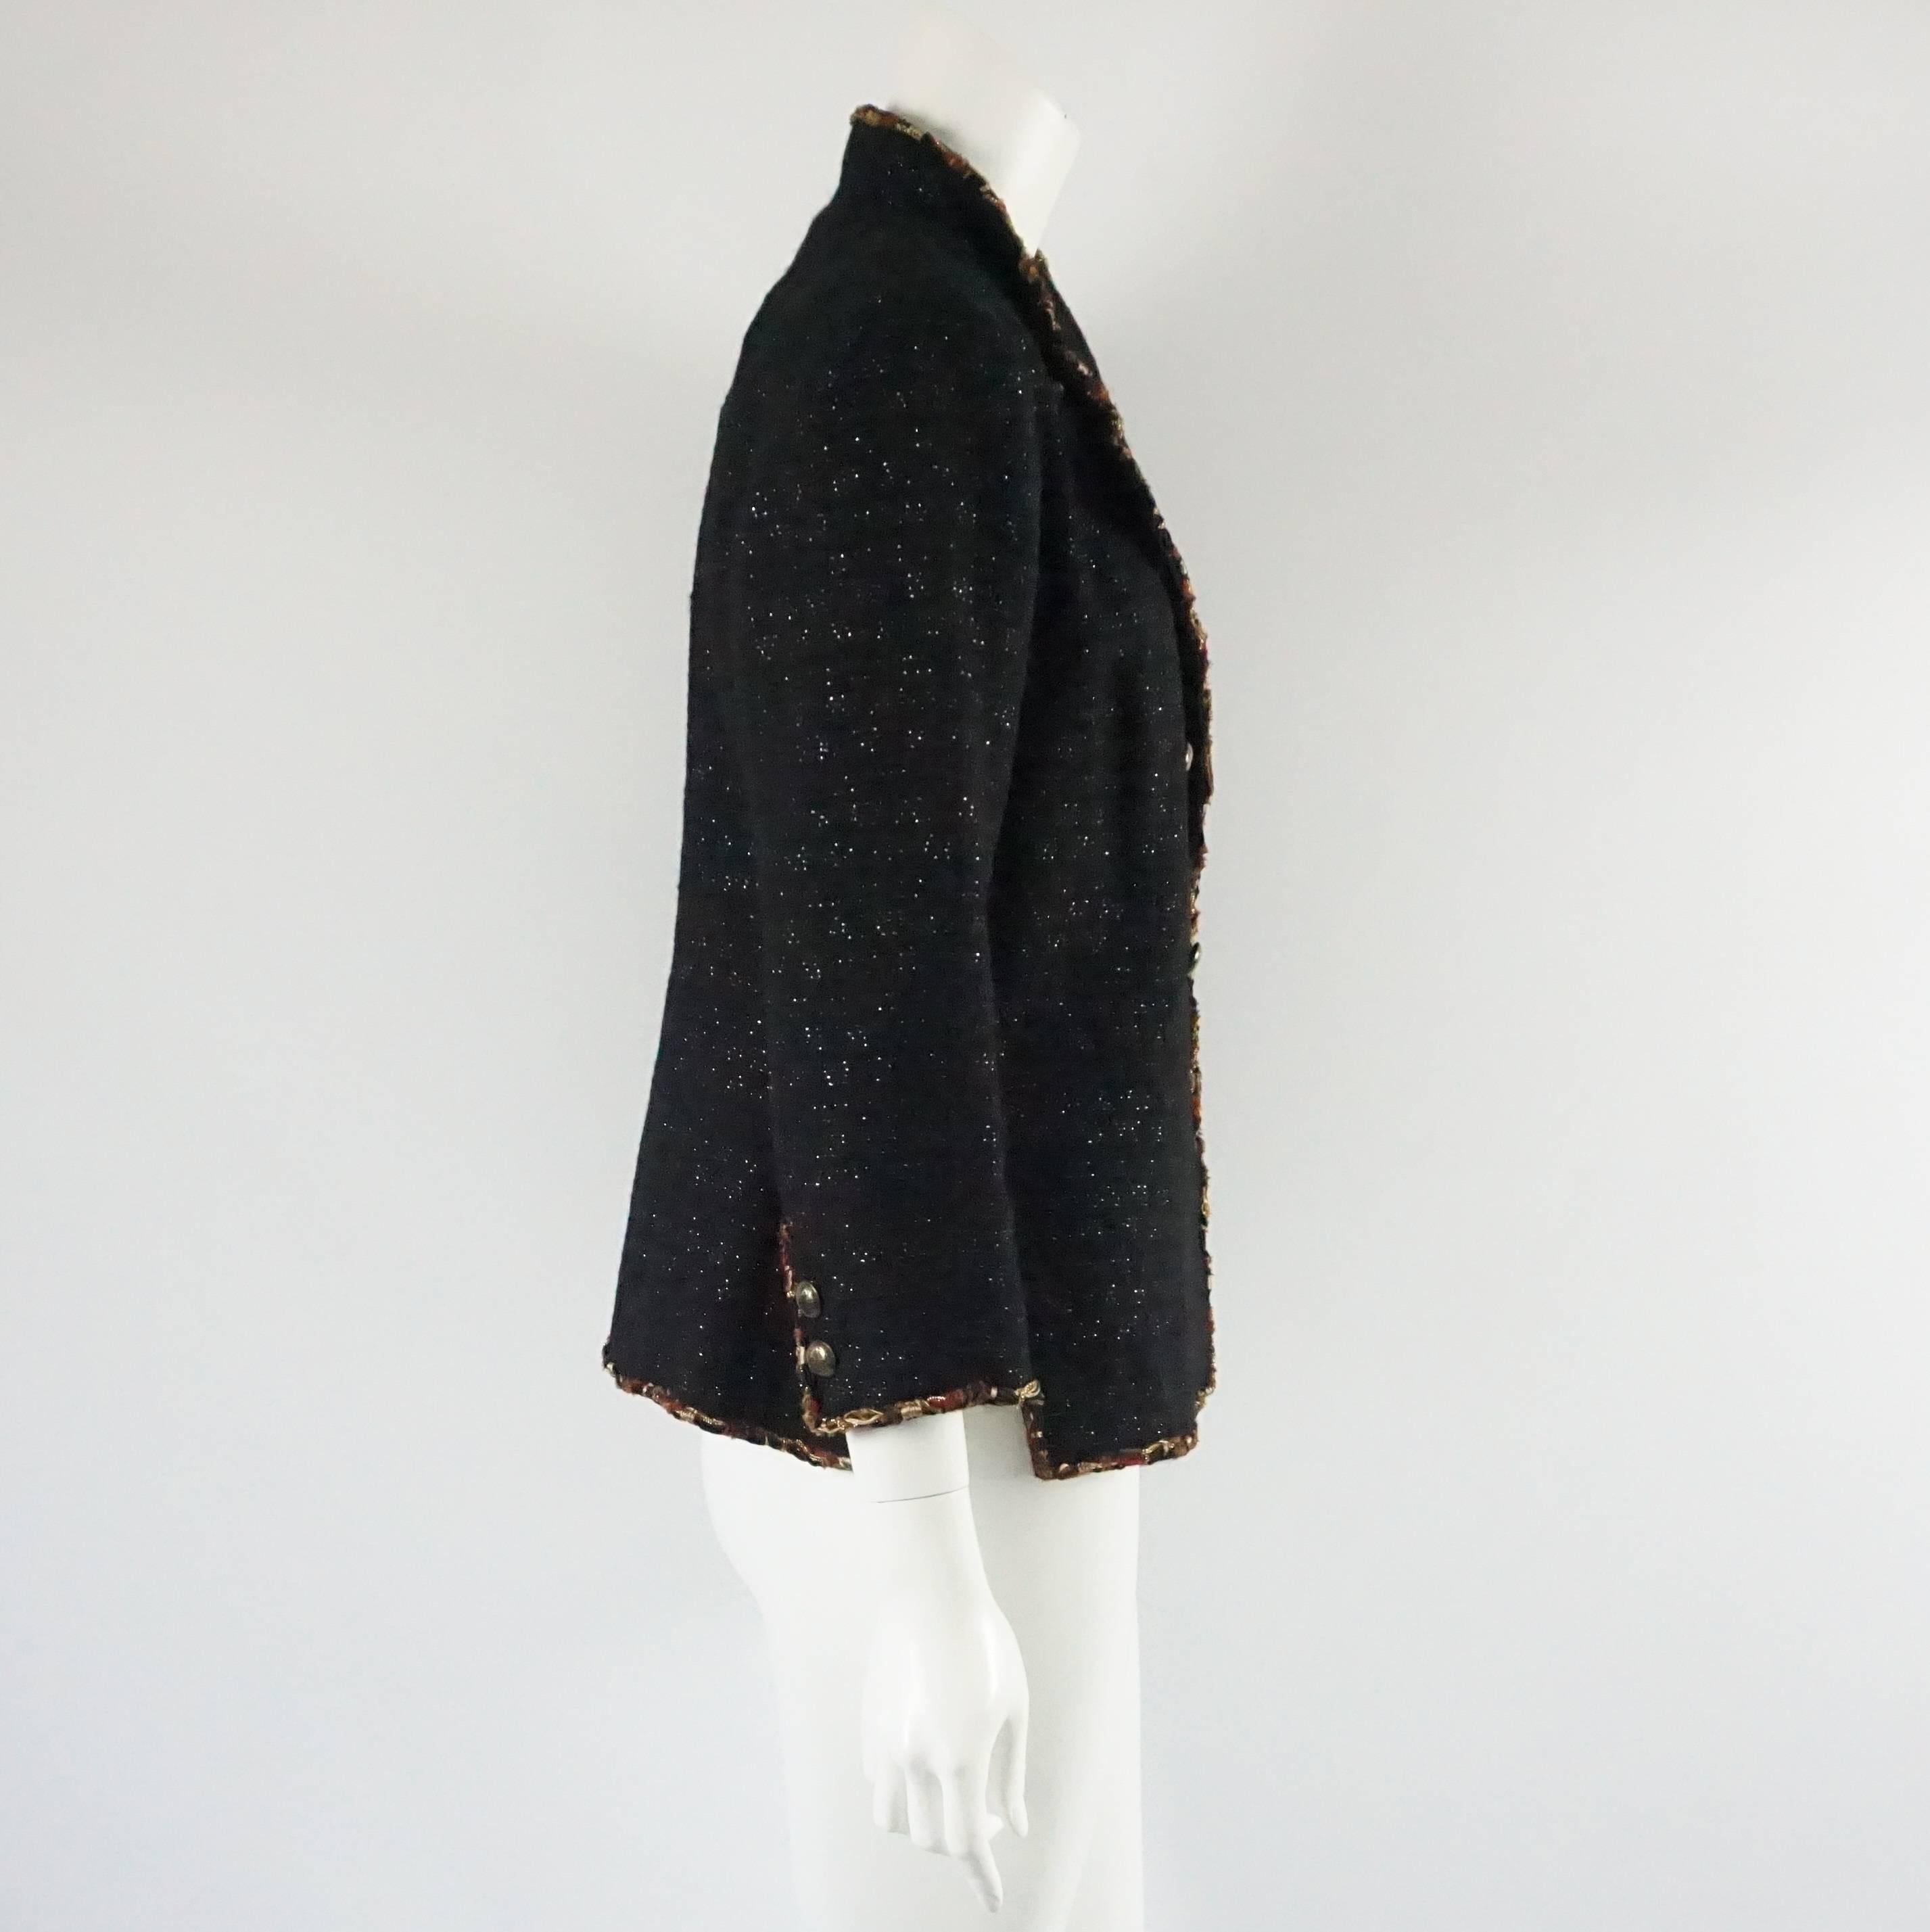 This Chanel black wool jacket has an amber chain trim. This jacket features a collar, 2 buttons on each cuff, and a double breasted design. This jacket is in excellent condition. Size 42.

Measurements
Shoulder to Shoulder: 16"
Sleeve Length: